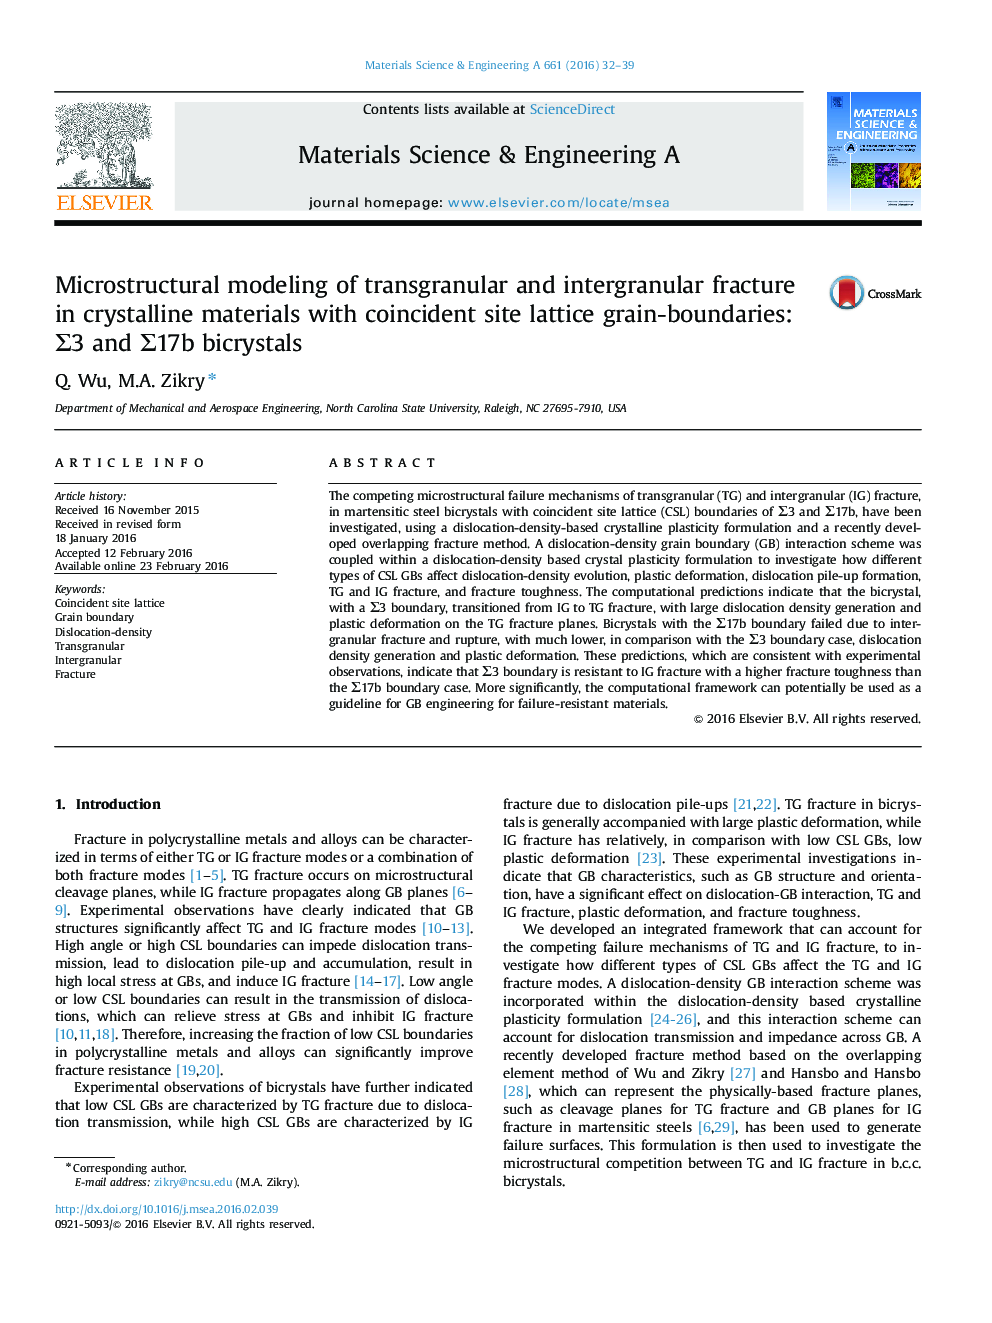 Microstructural modeling of transgranular and intergranular fracture in crystalline materials with coincident site lattice grain-boundaries: Î£3 and Î£17b bicrystals